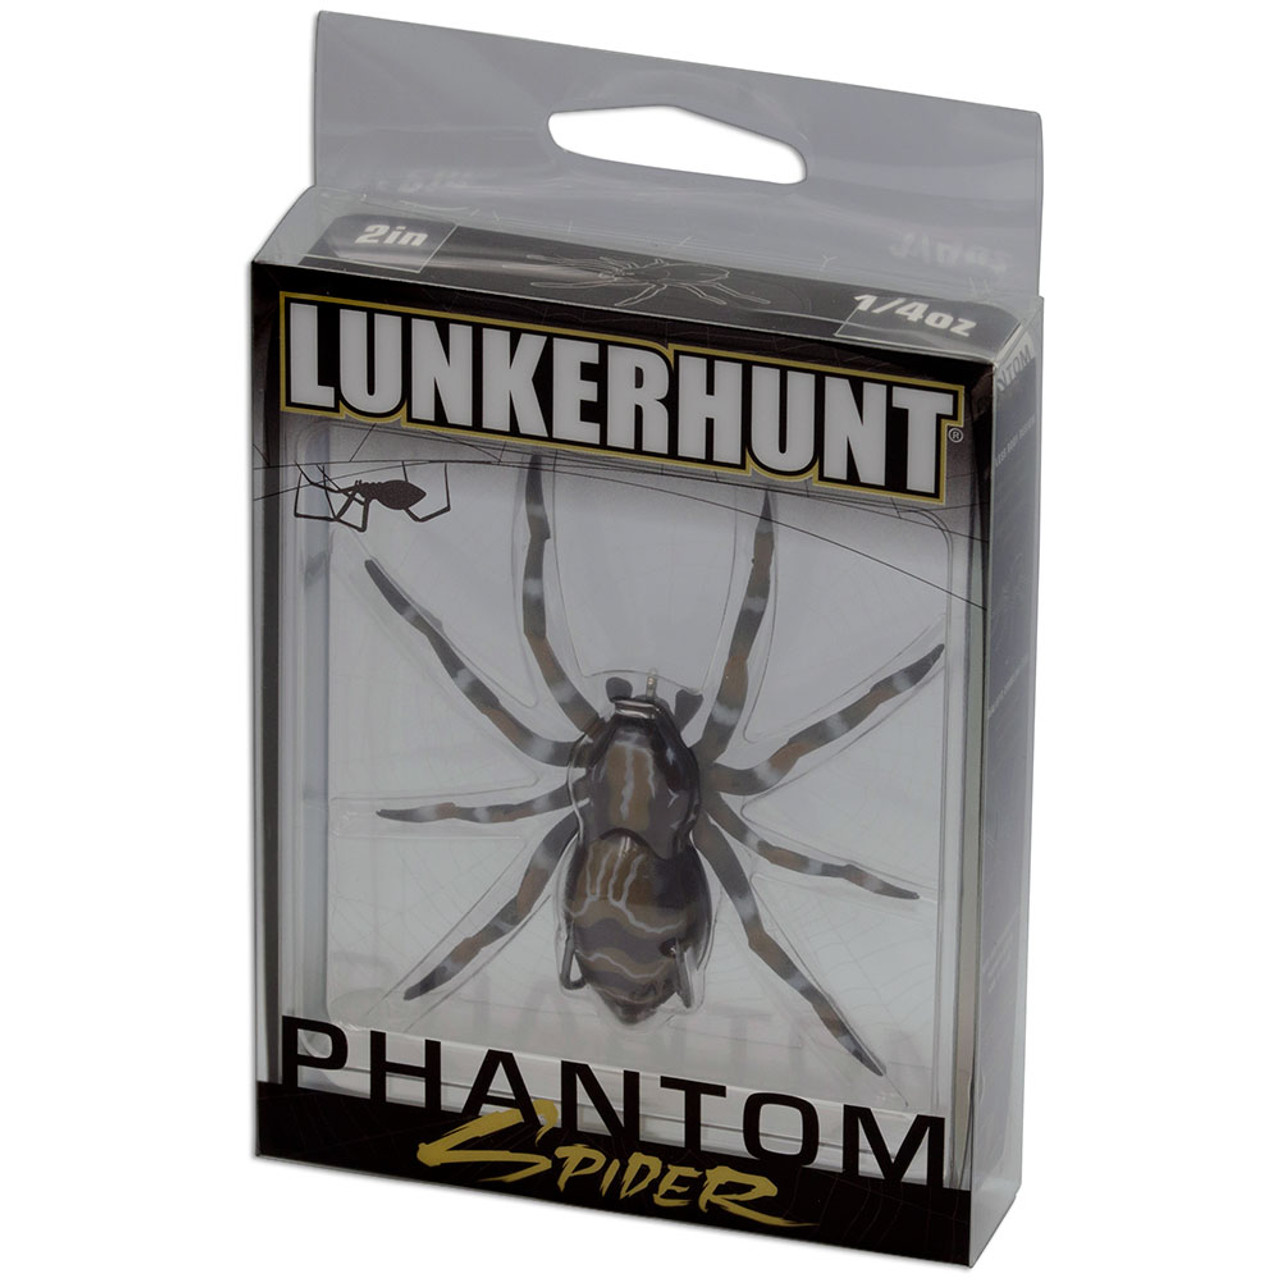 Lunkerhunt Phantom Spider Fishing Lures - general for sale - by